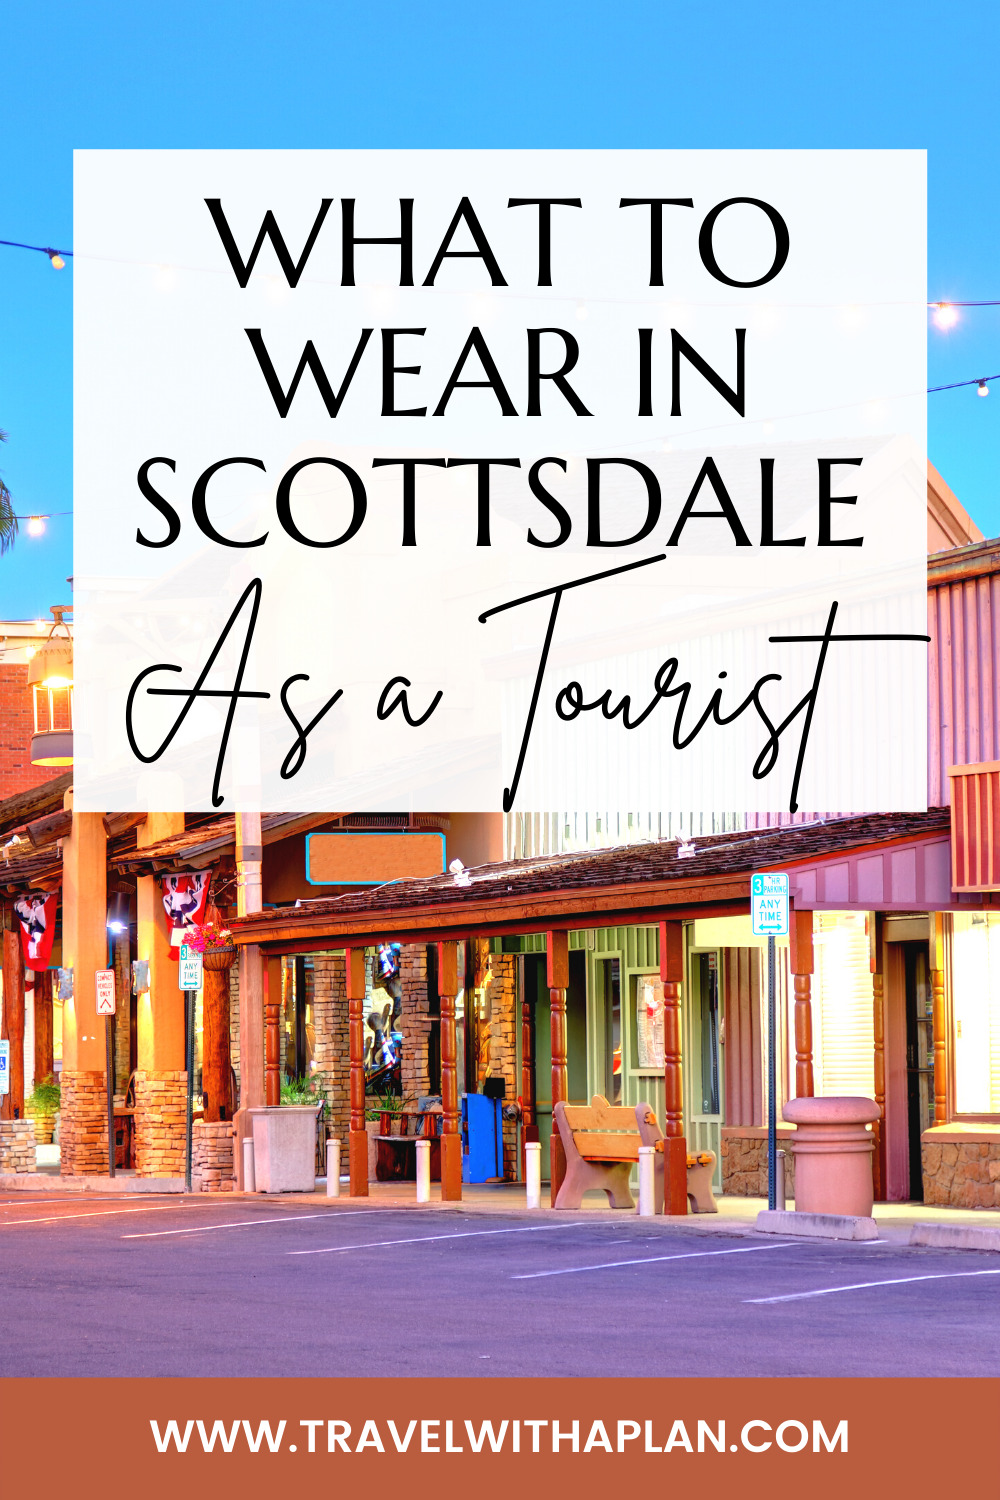 Discover what to wear in Scottdale, Arizona from top US family travel blog, Travel With A Plan!